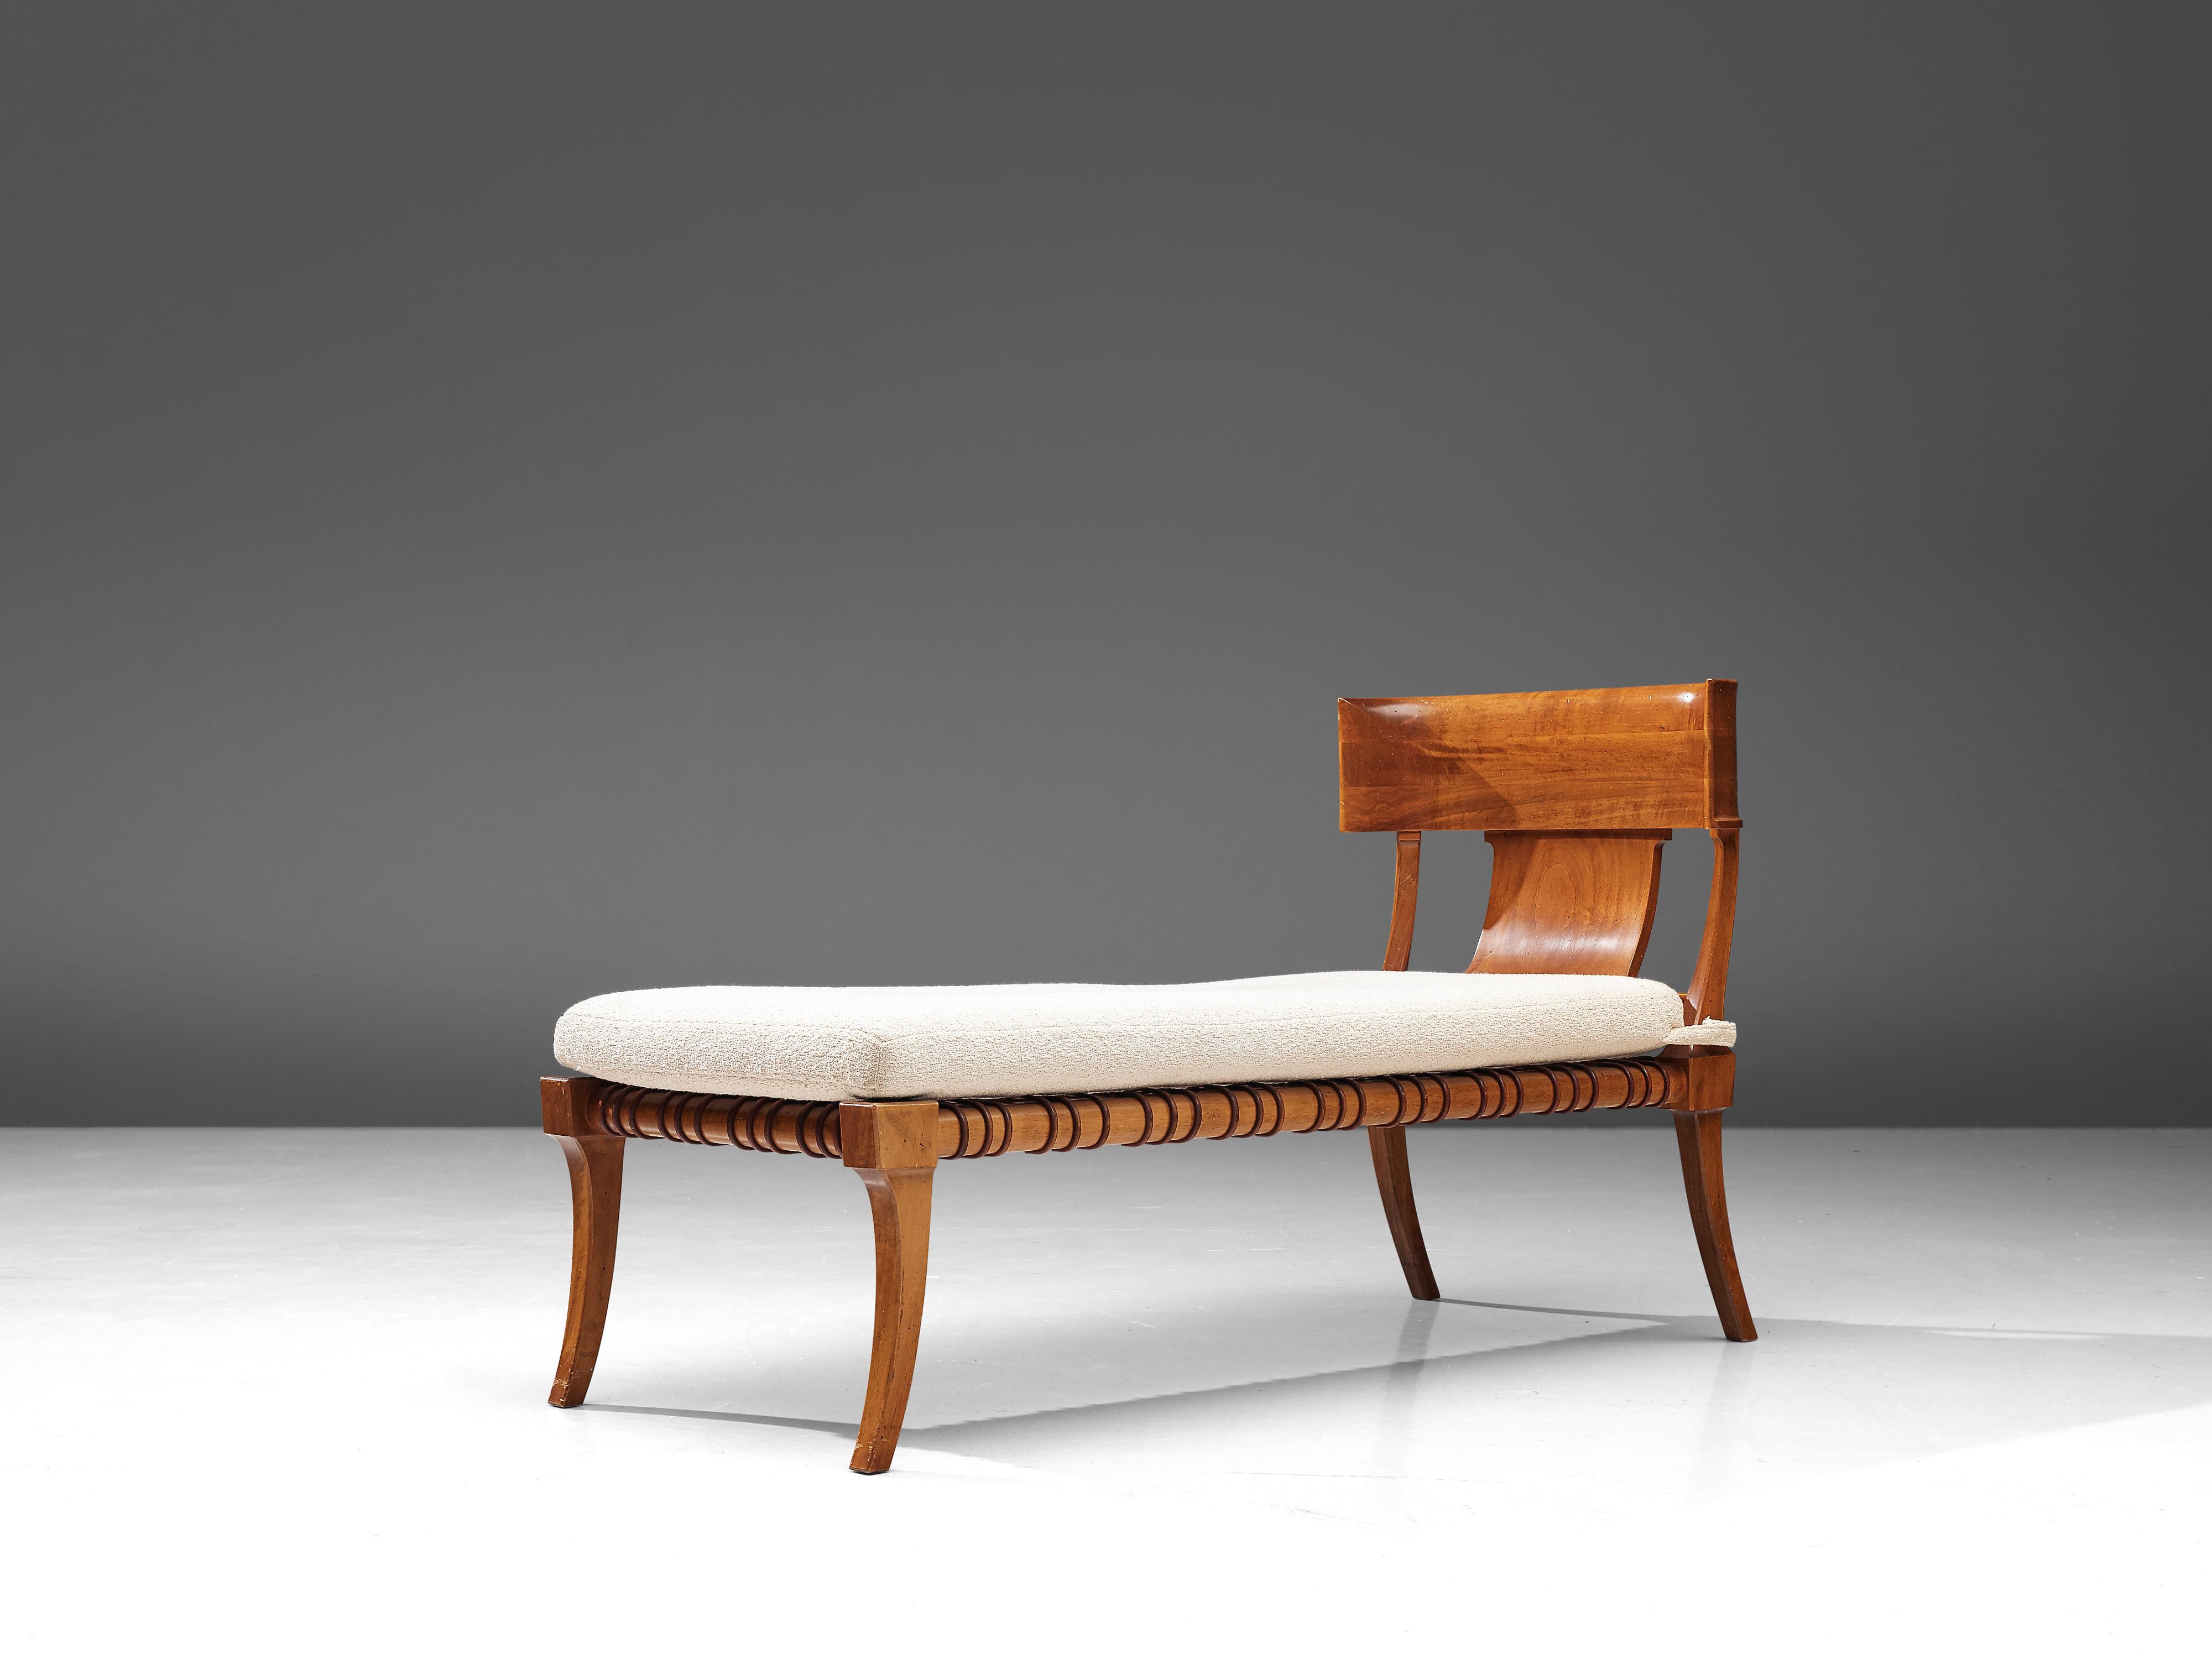 T.H. Robjohn-Gibbings for Saridis of Athens, 'Klini' chaise lounge model nr. 11, walnut, leather, fabric, United States, 1961

An ancient Greek inspired daybed by the British designer T.H. Robjohn Gibbings. This chaise lounge was part of the